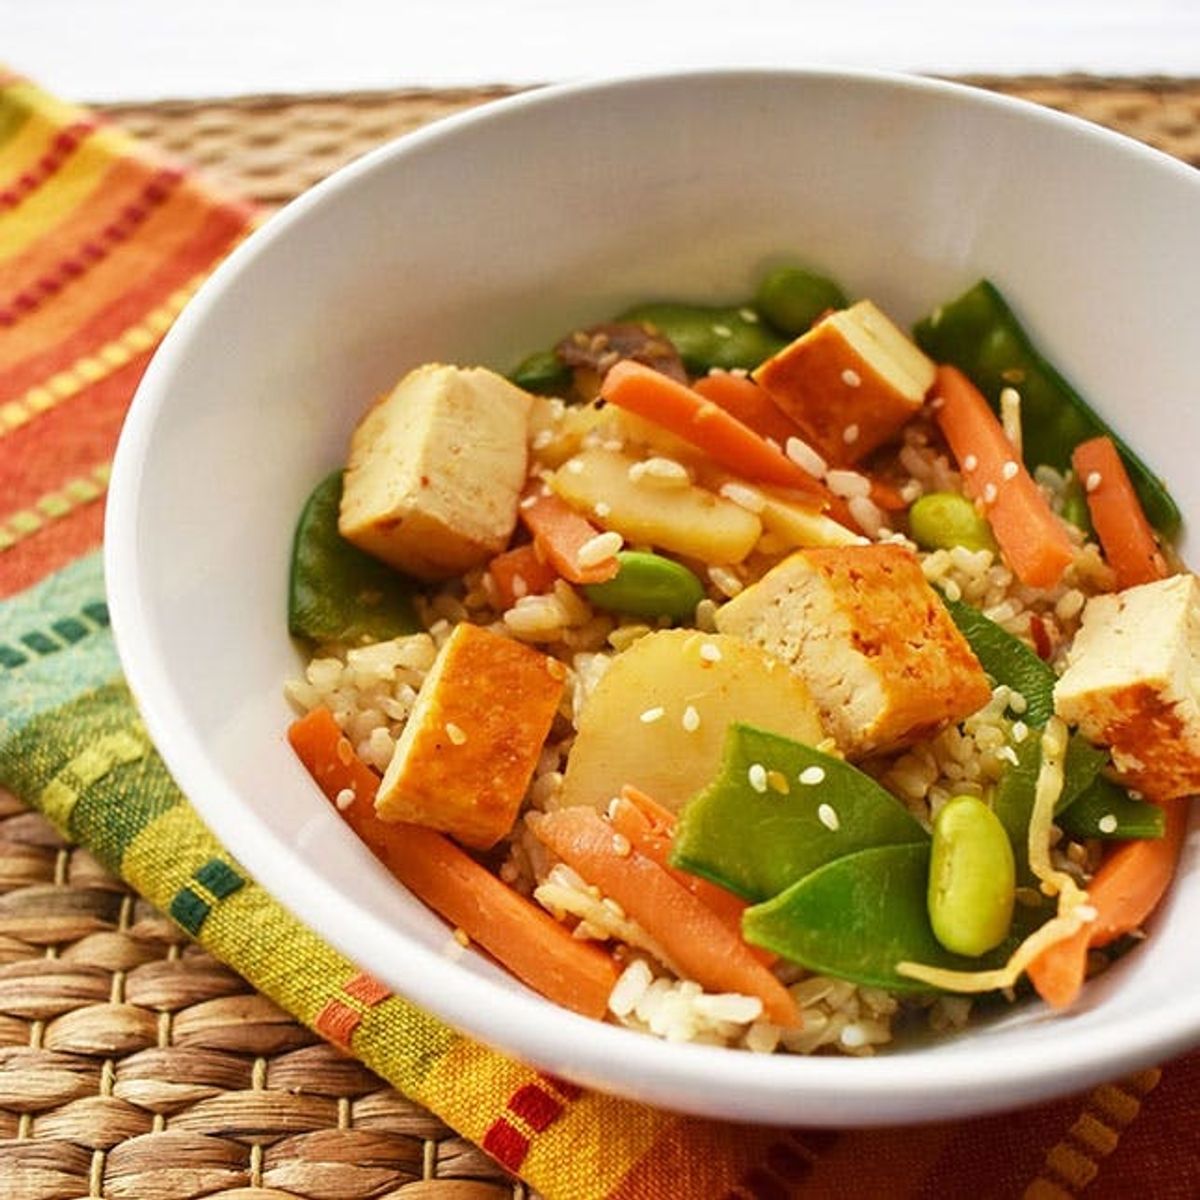 Attention Vegans: This 10-Minute Trader Joe's Stir-Fry Dinner Recipe Is for You